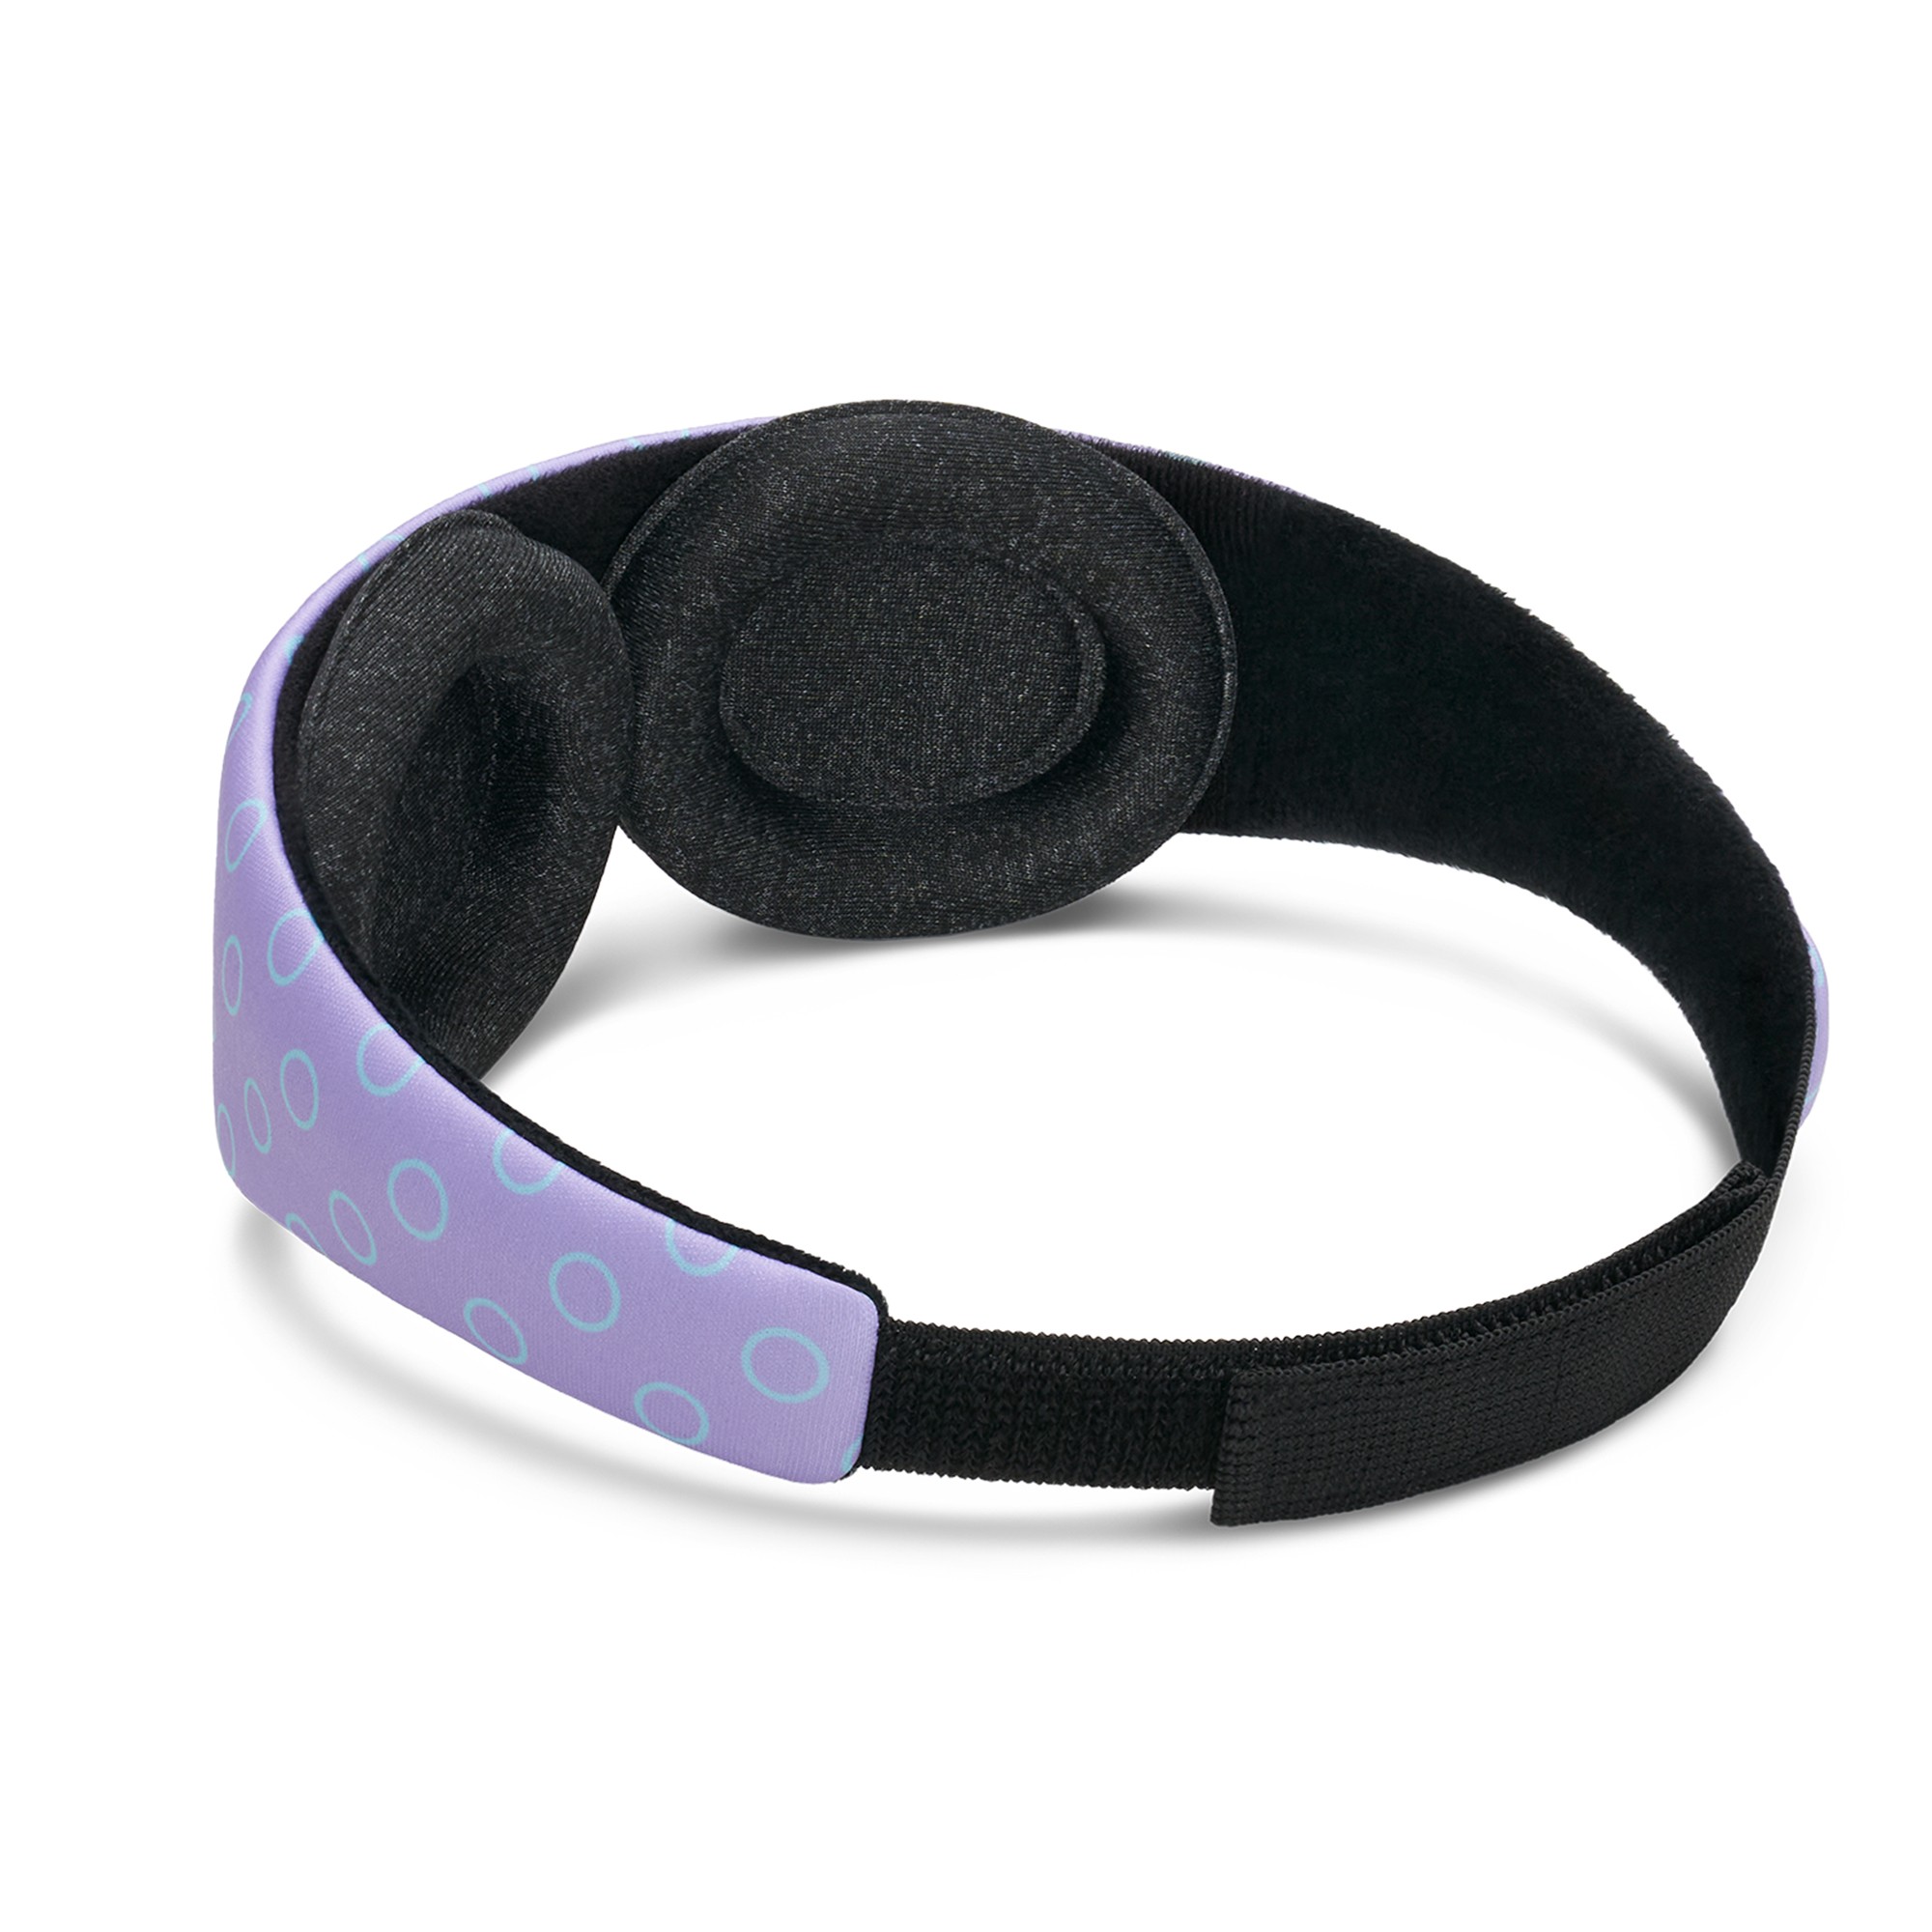 The interior of a lilac adjustable sleep mask for children with eye cups.